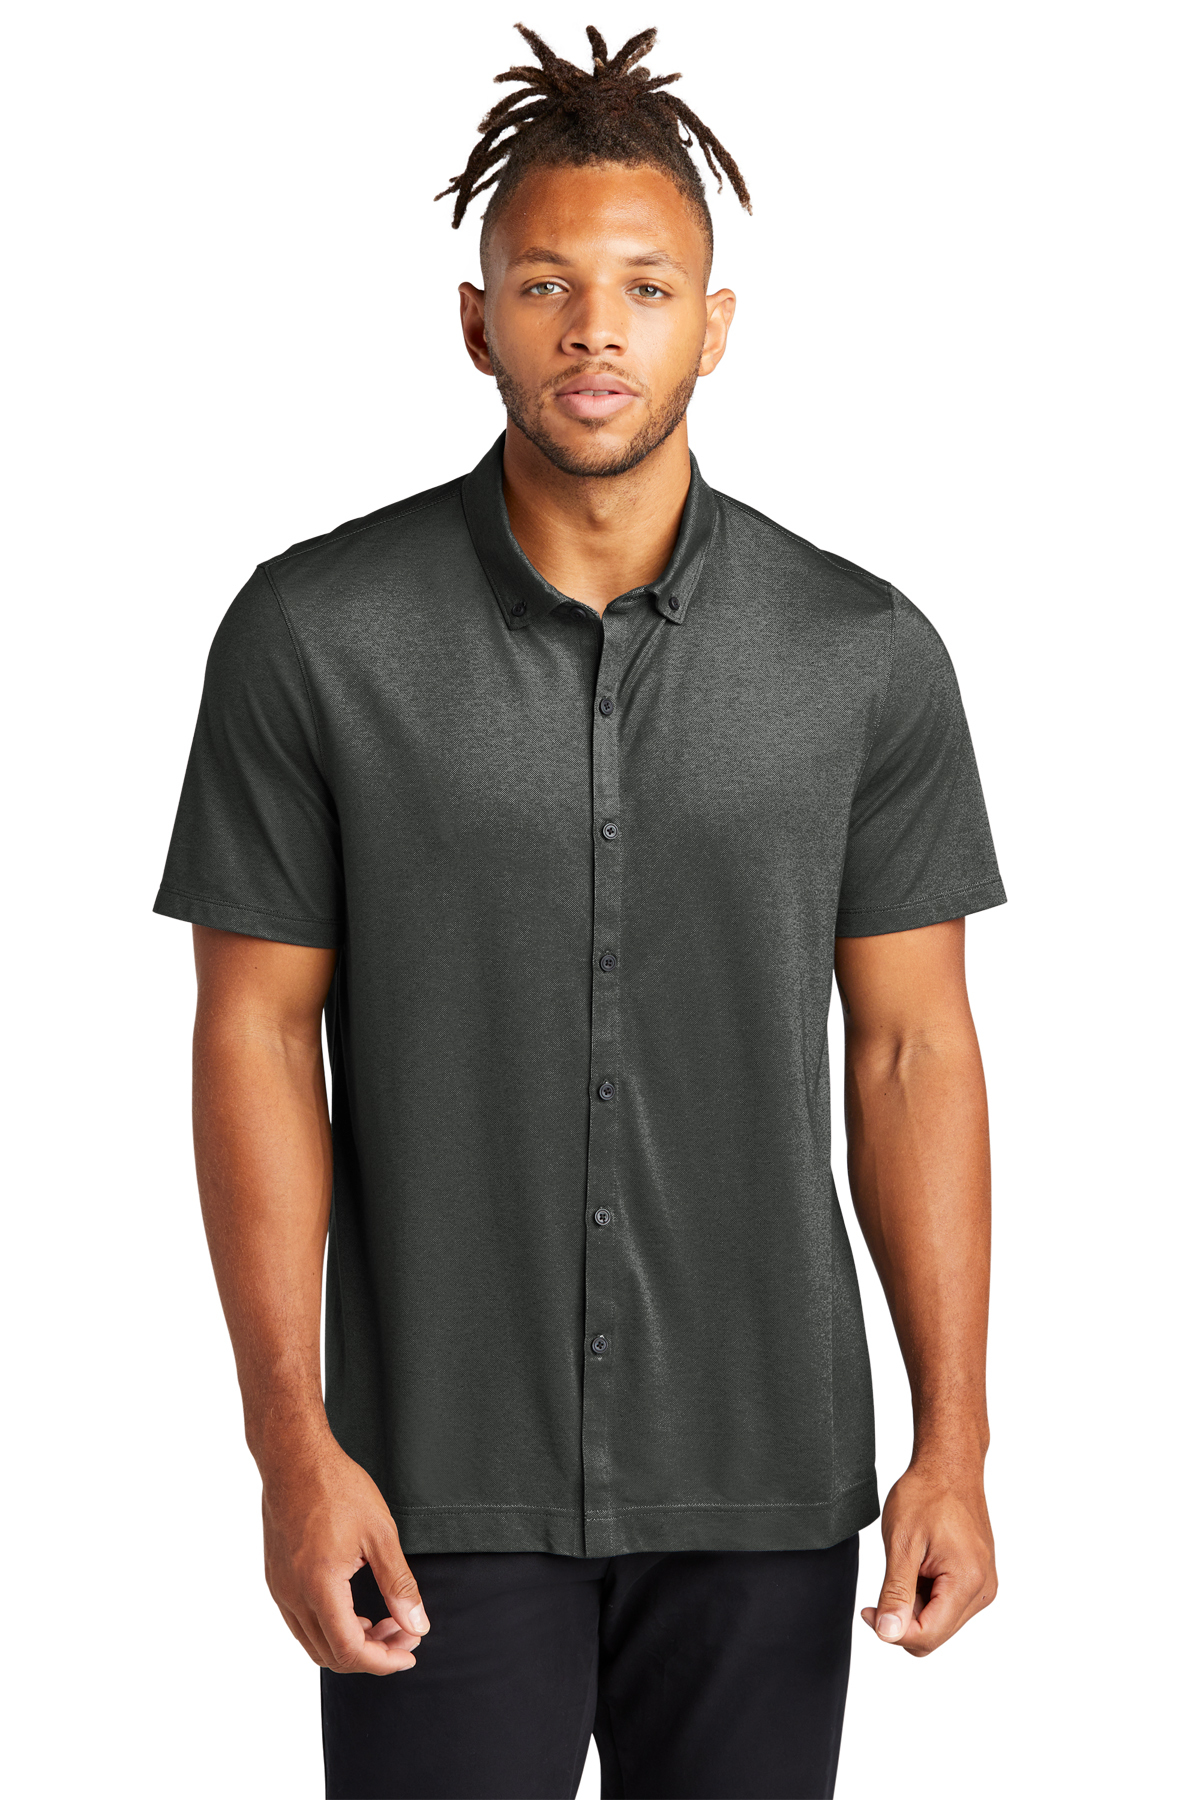 Mercer+Mettle Stretch Pique Full-Button Polo SanMar Product | 